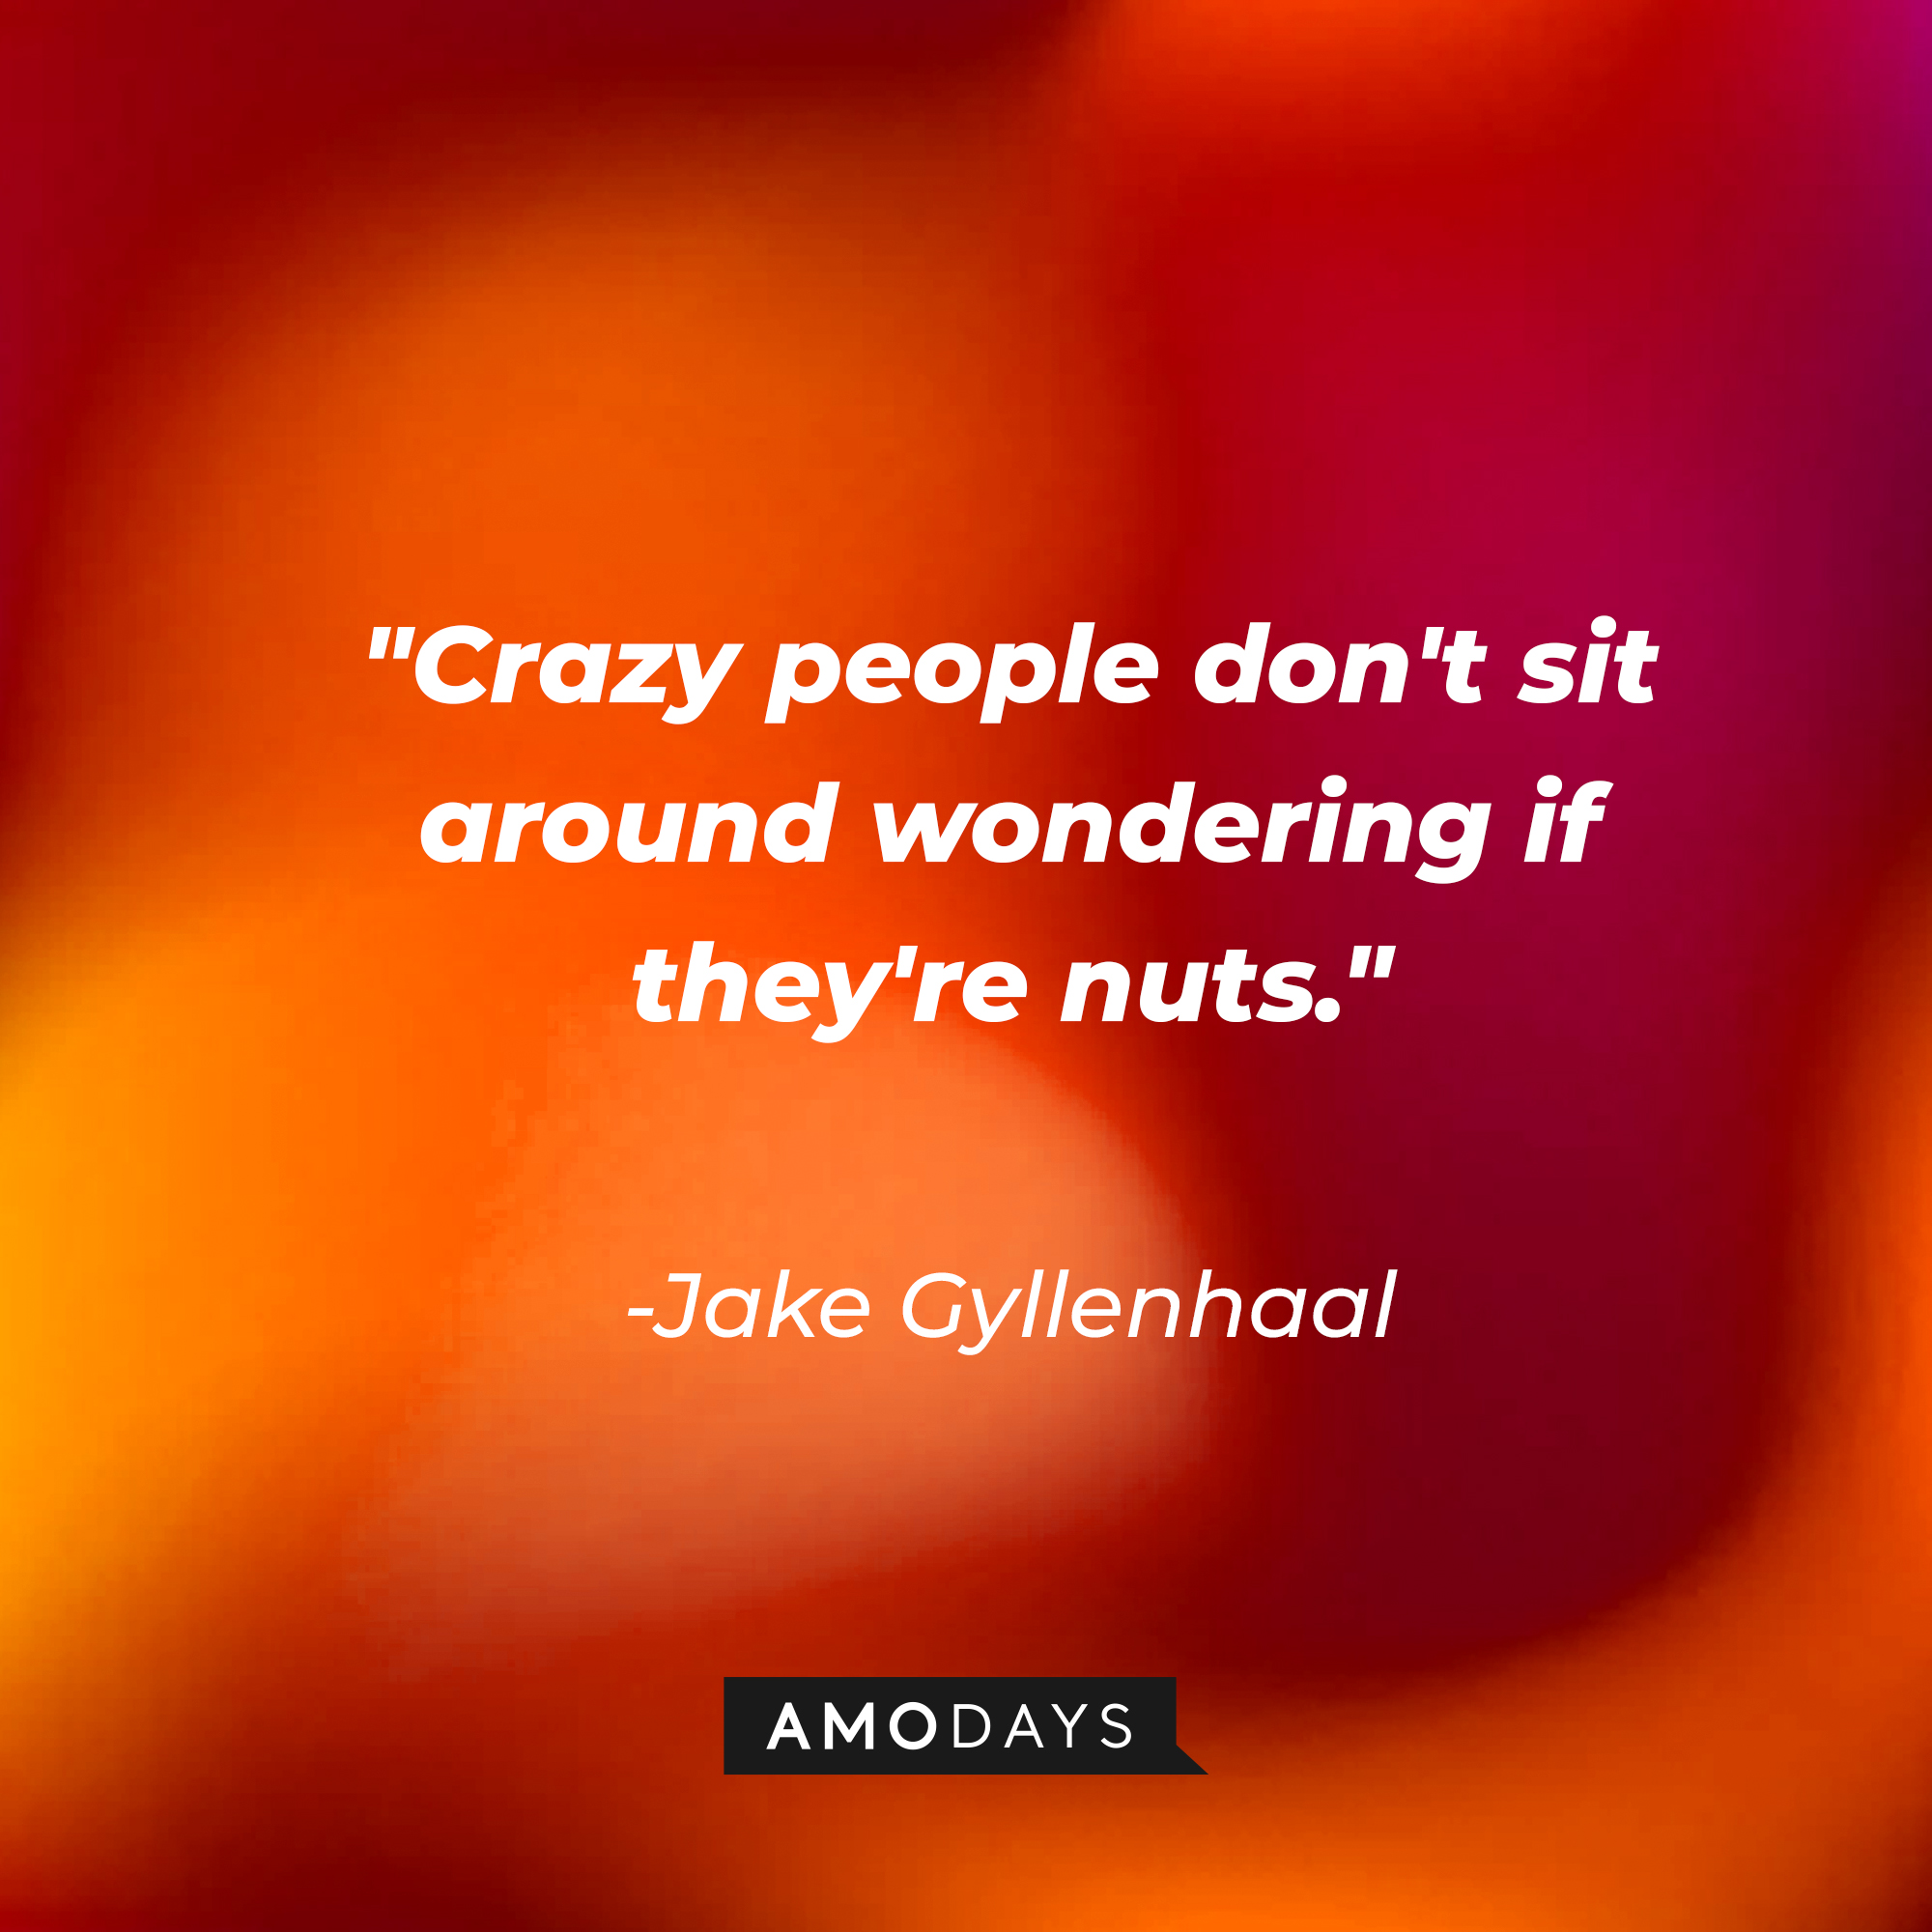 Jake Gyllenhaal's quote: "Crazy people don't sit around wondering if they're nuts." | Source: AmoDays